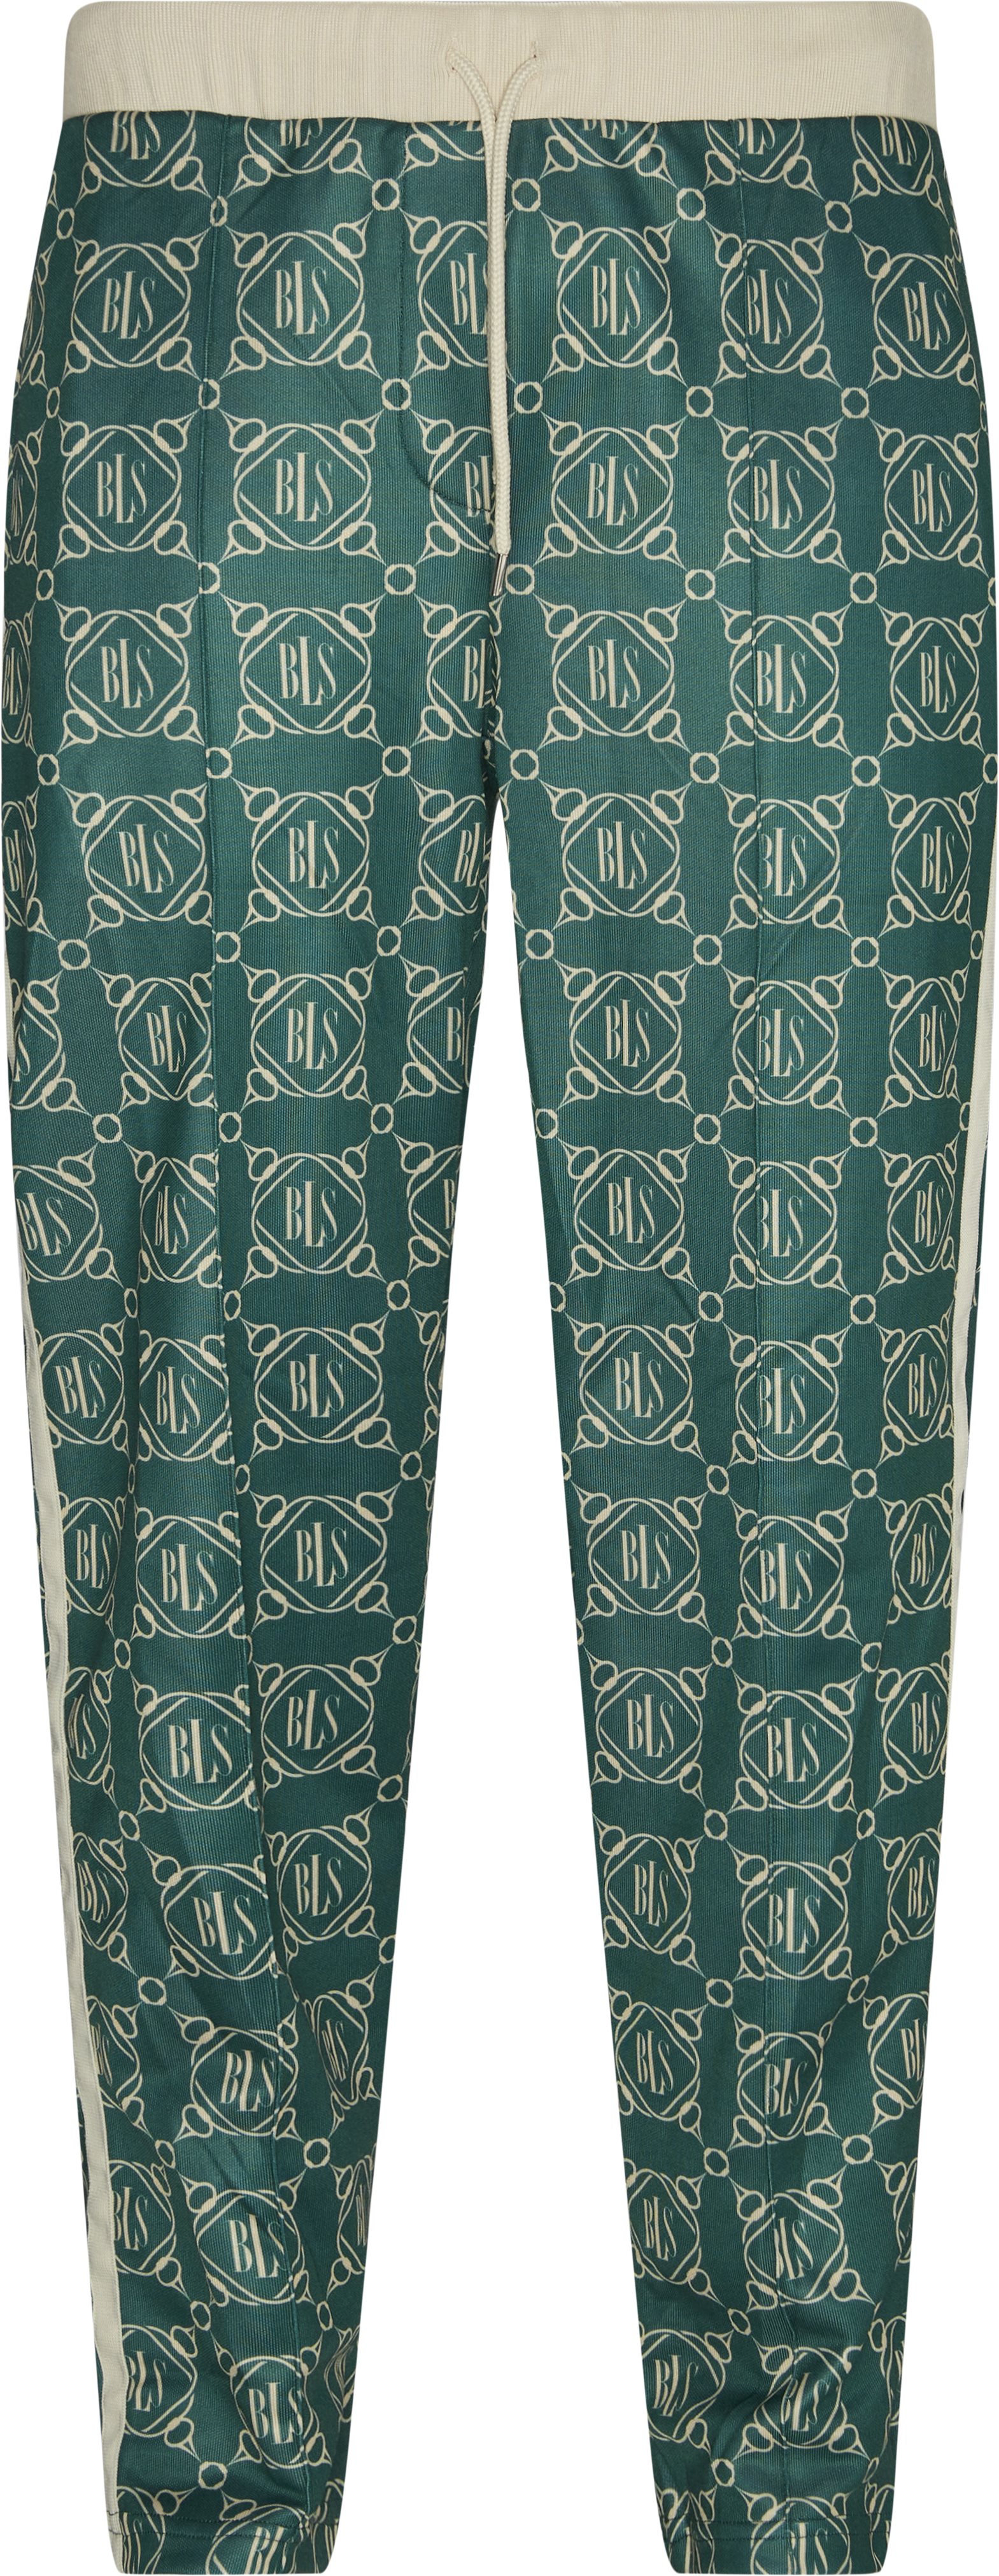 Martinez Dome Pants - Trousers - Regular fit - Green